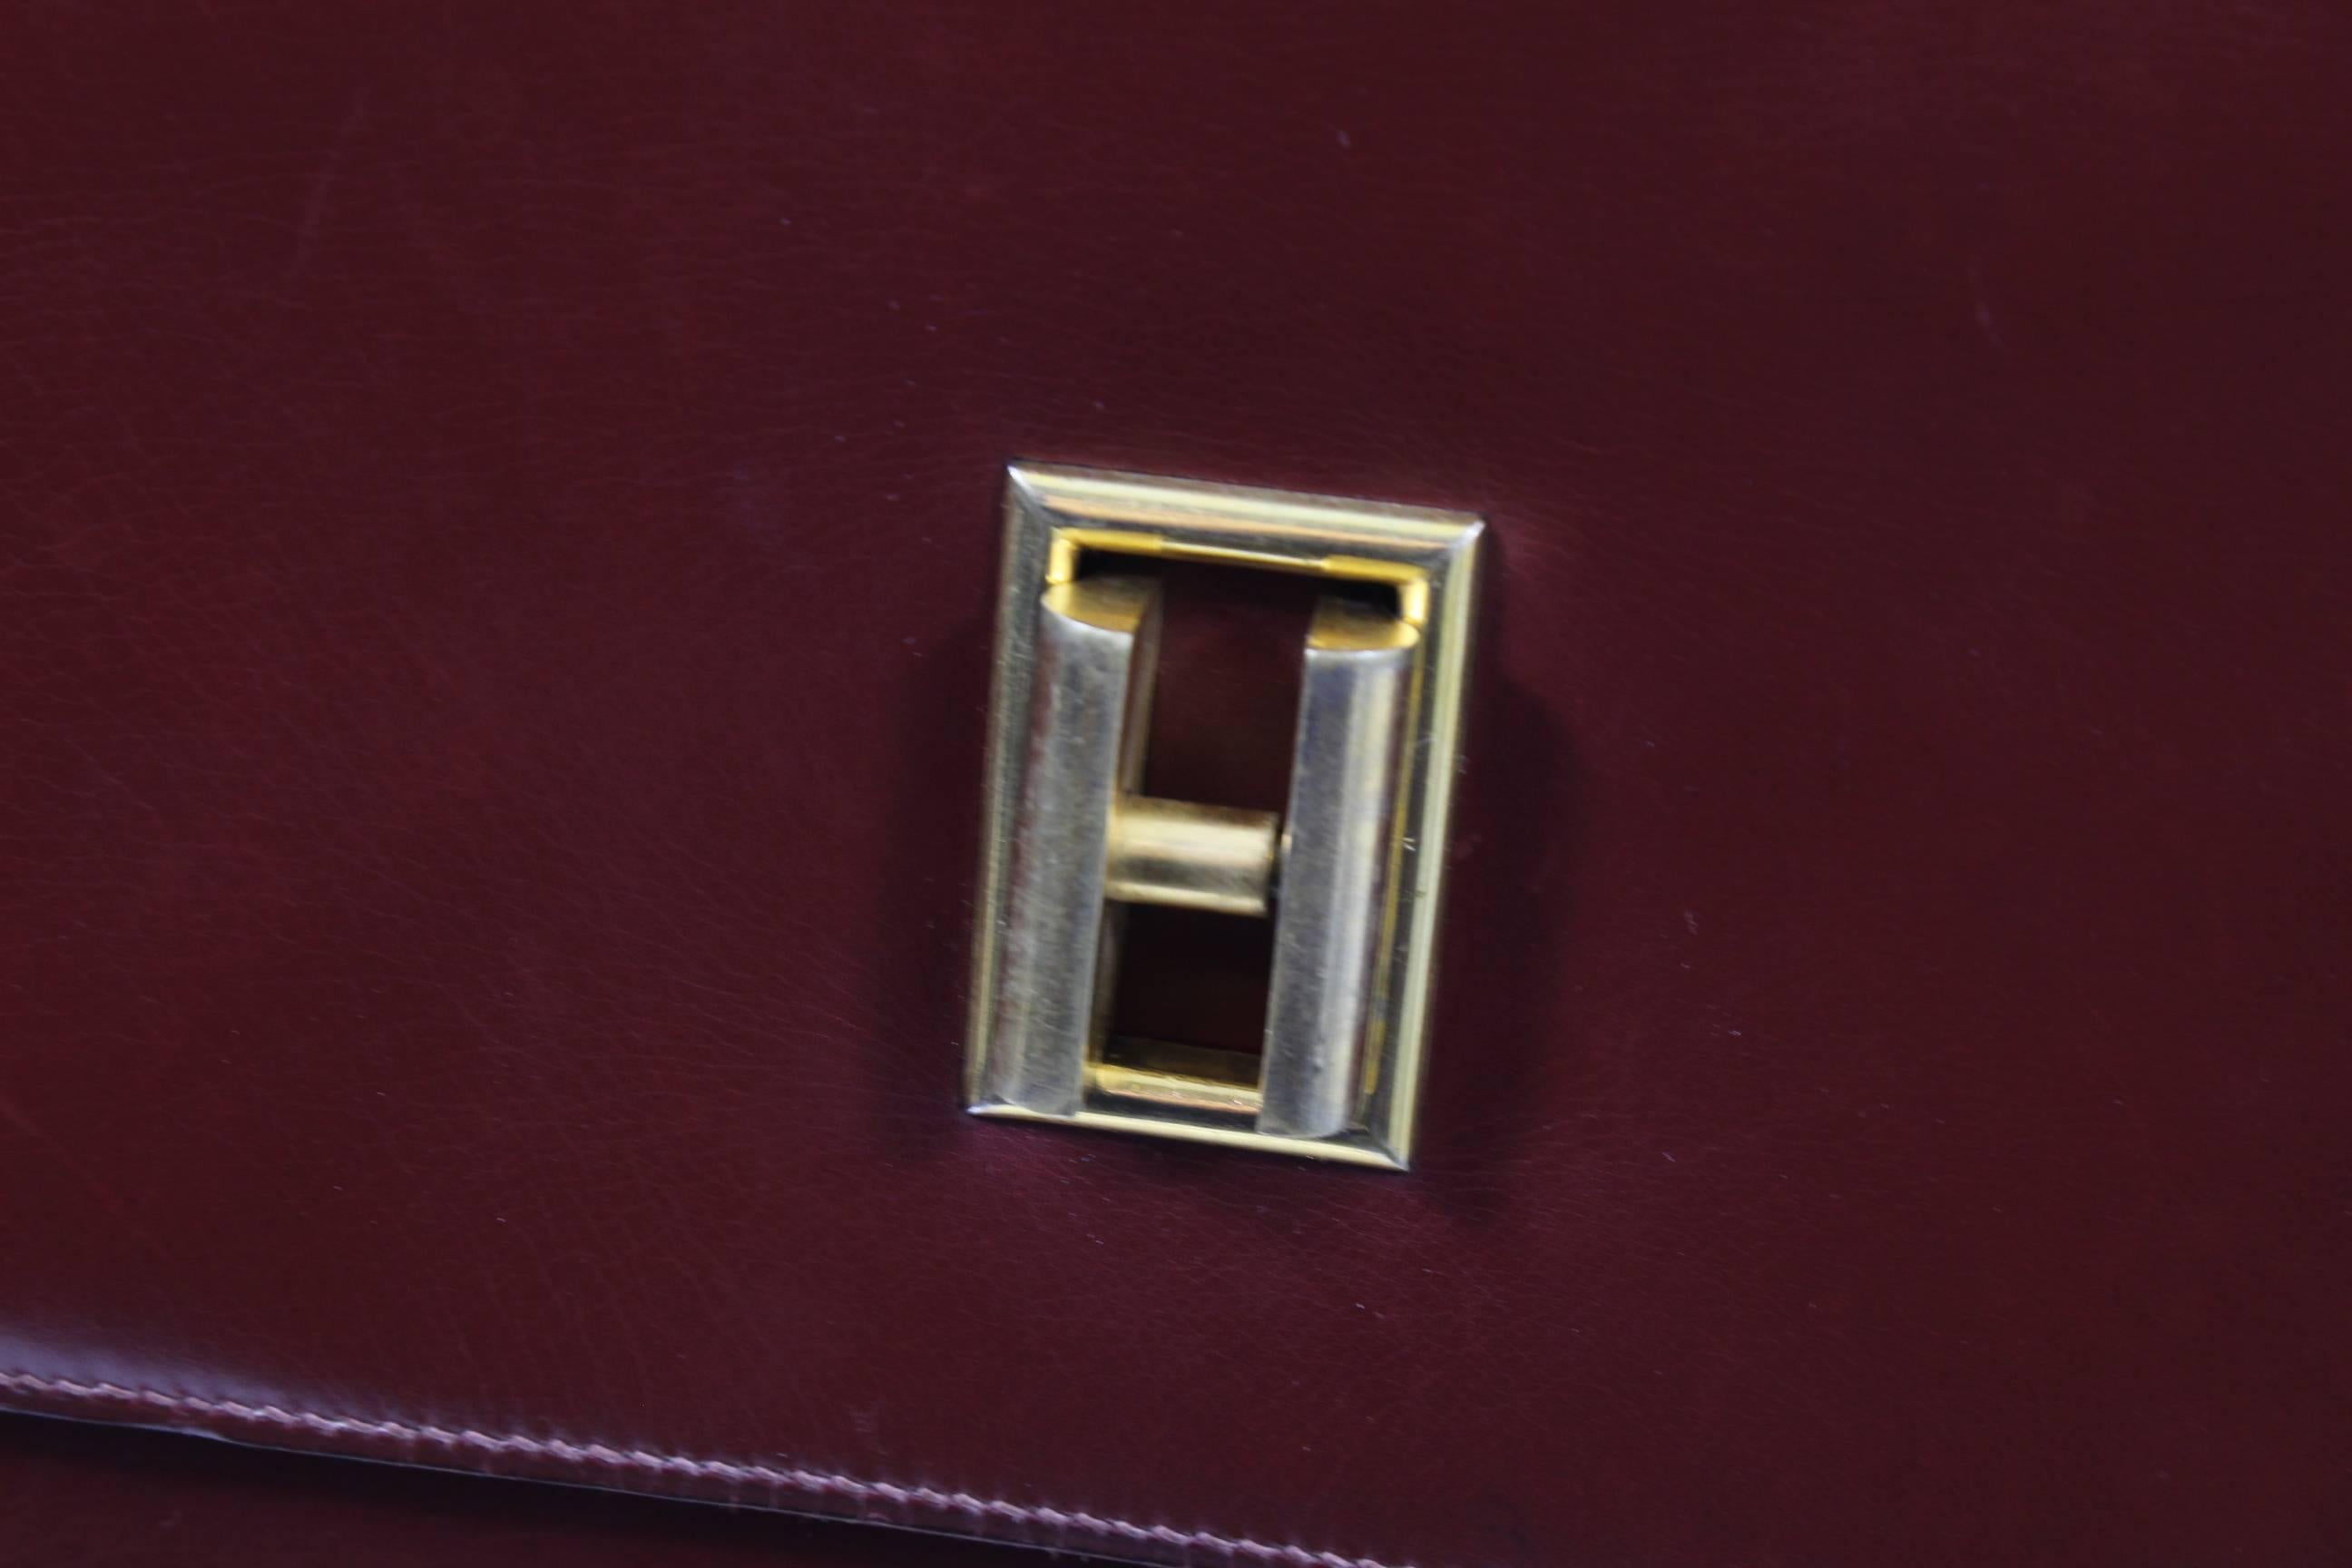 Rreally nice Vintage hermes bag in Bugundy Box leather.

Signature inside 24 Fbg St honoré so the bag is fom before 1950.

Bag in really good vintage condition, leather is not cracked and stiches are in really good condition.

Just a small tear in